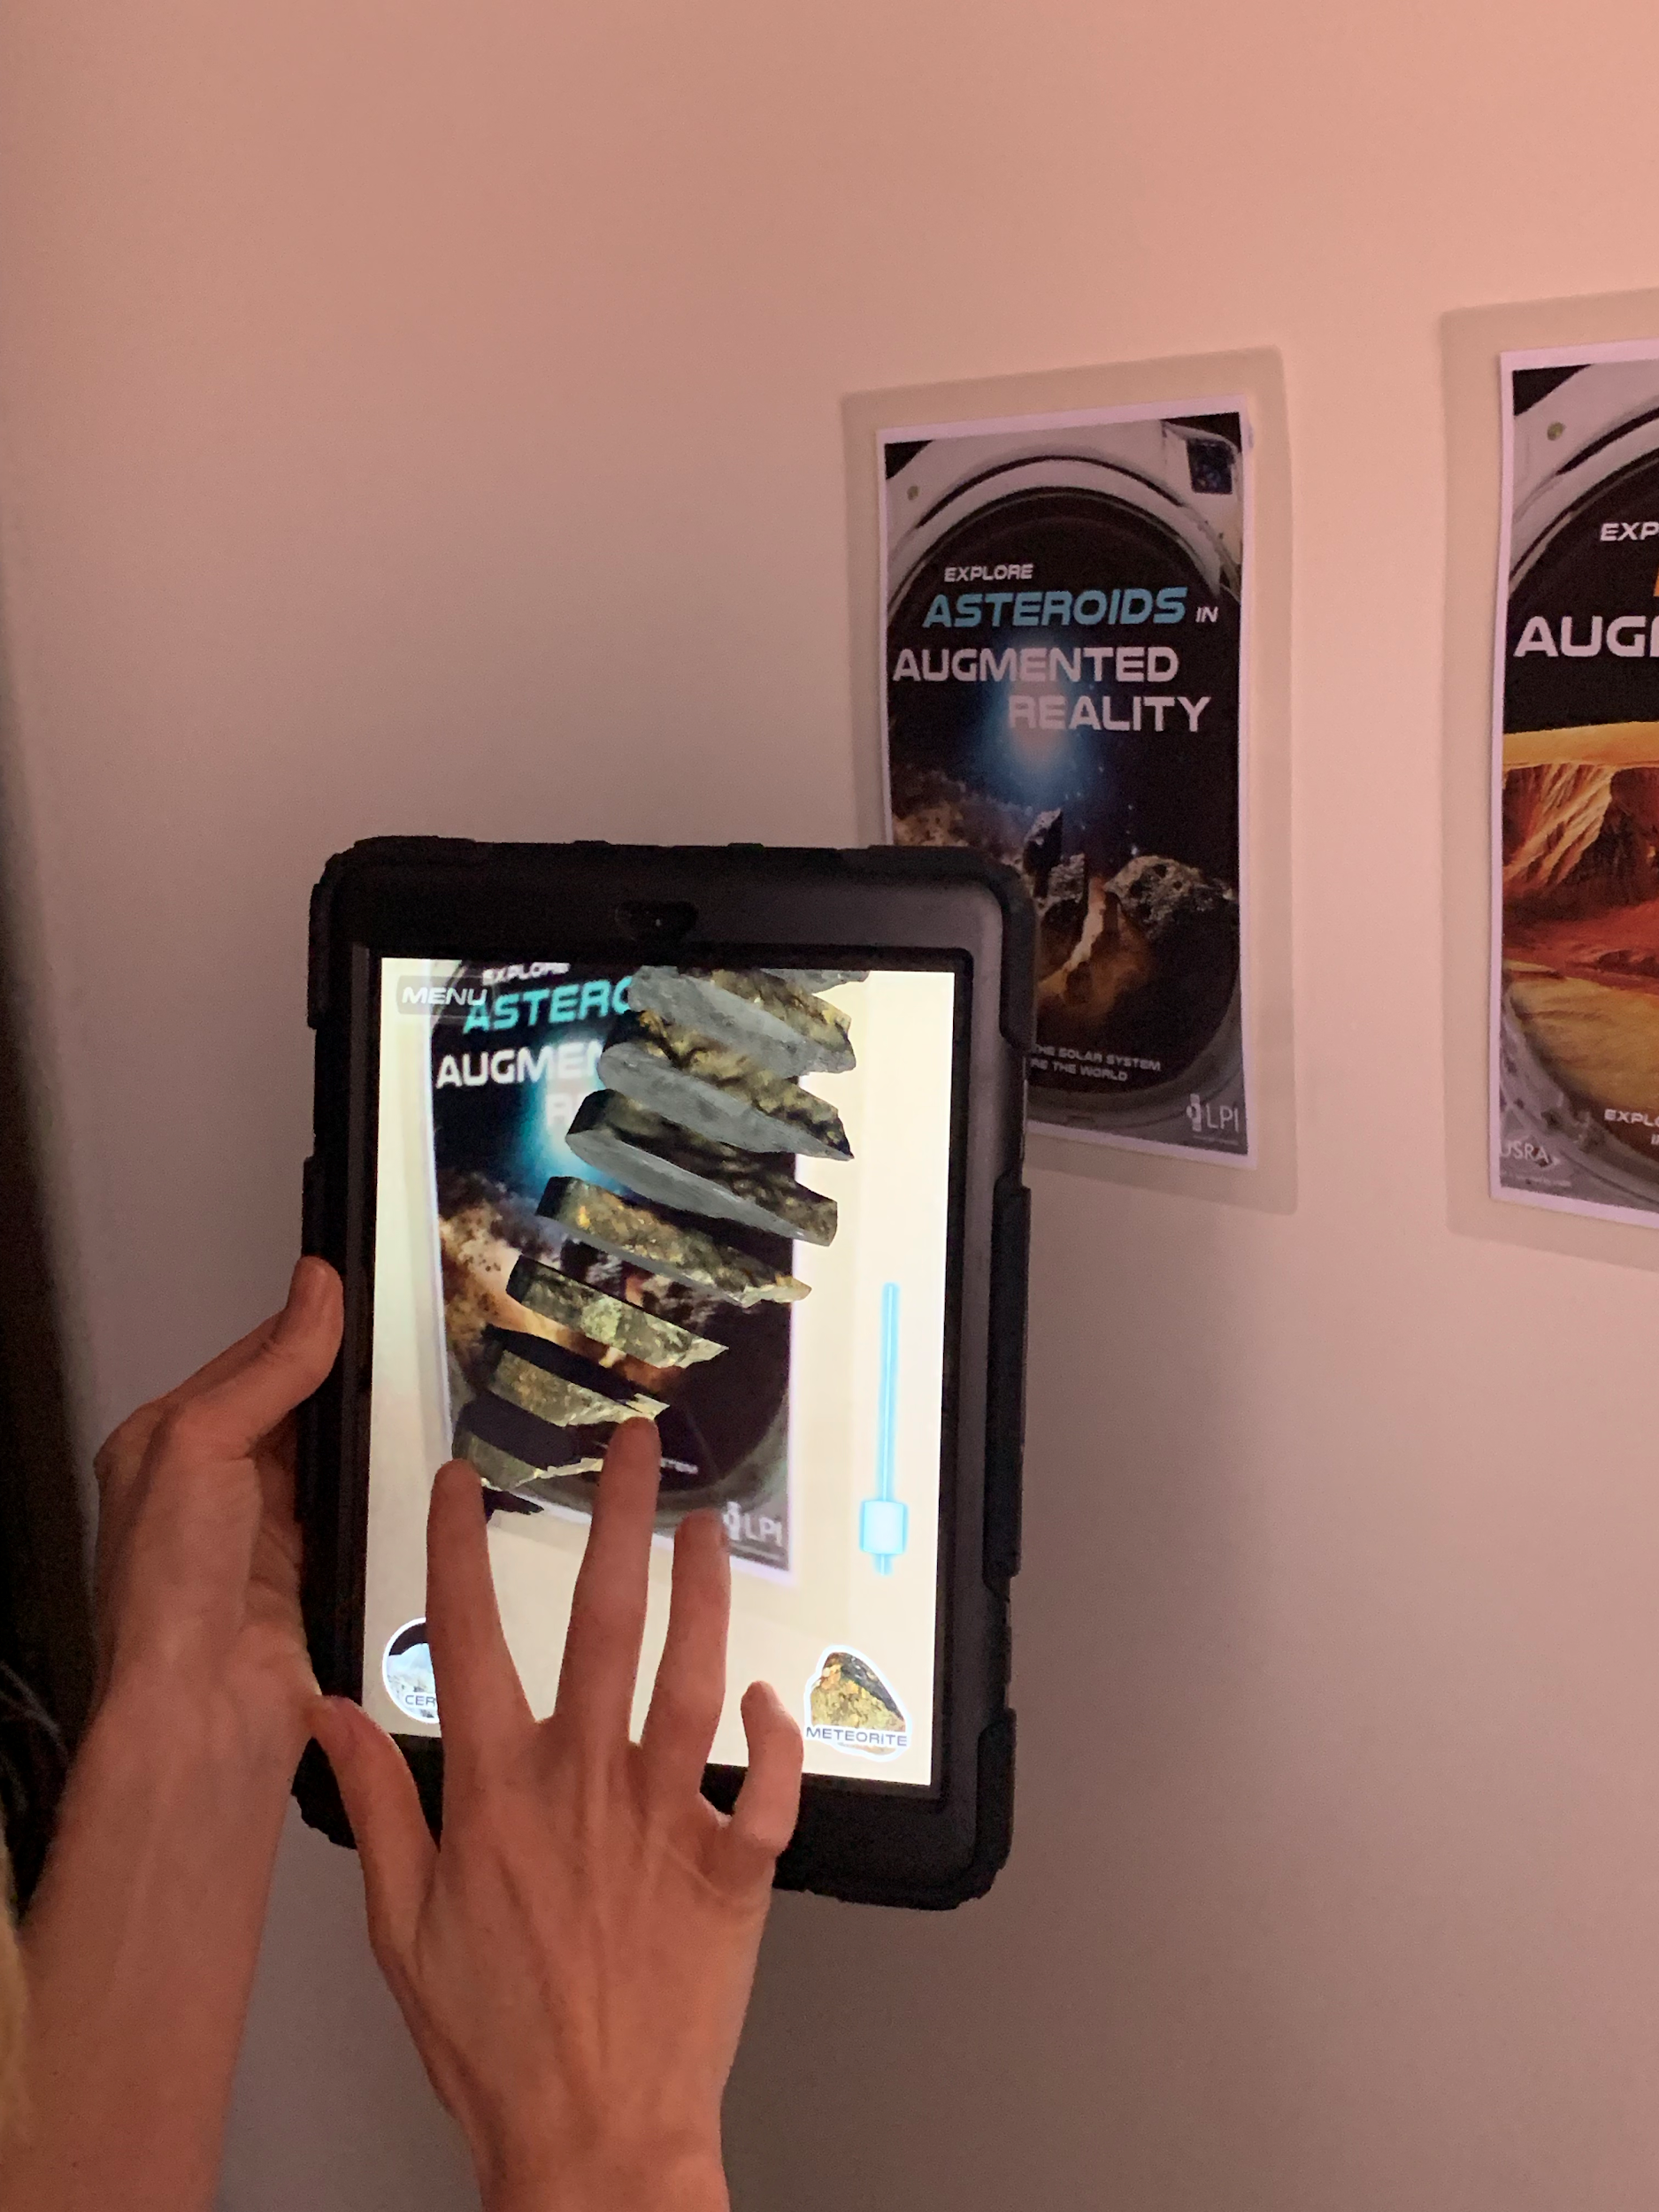 Photograph of a person holding up an iPad to a poster on the wall. The iPad shows a 3D version of the image on the wall.